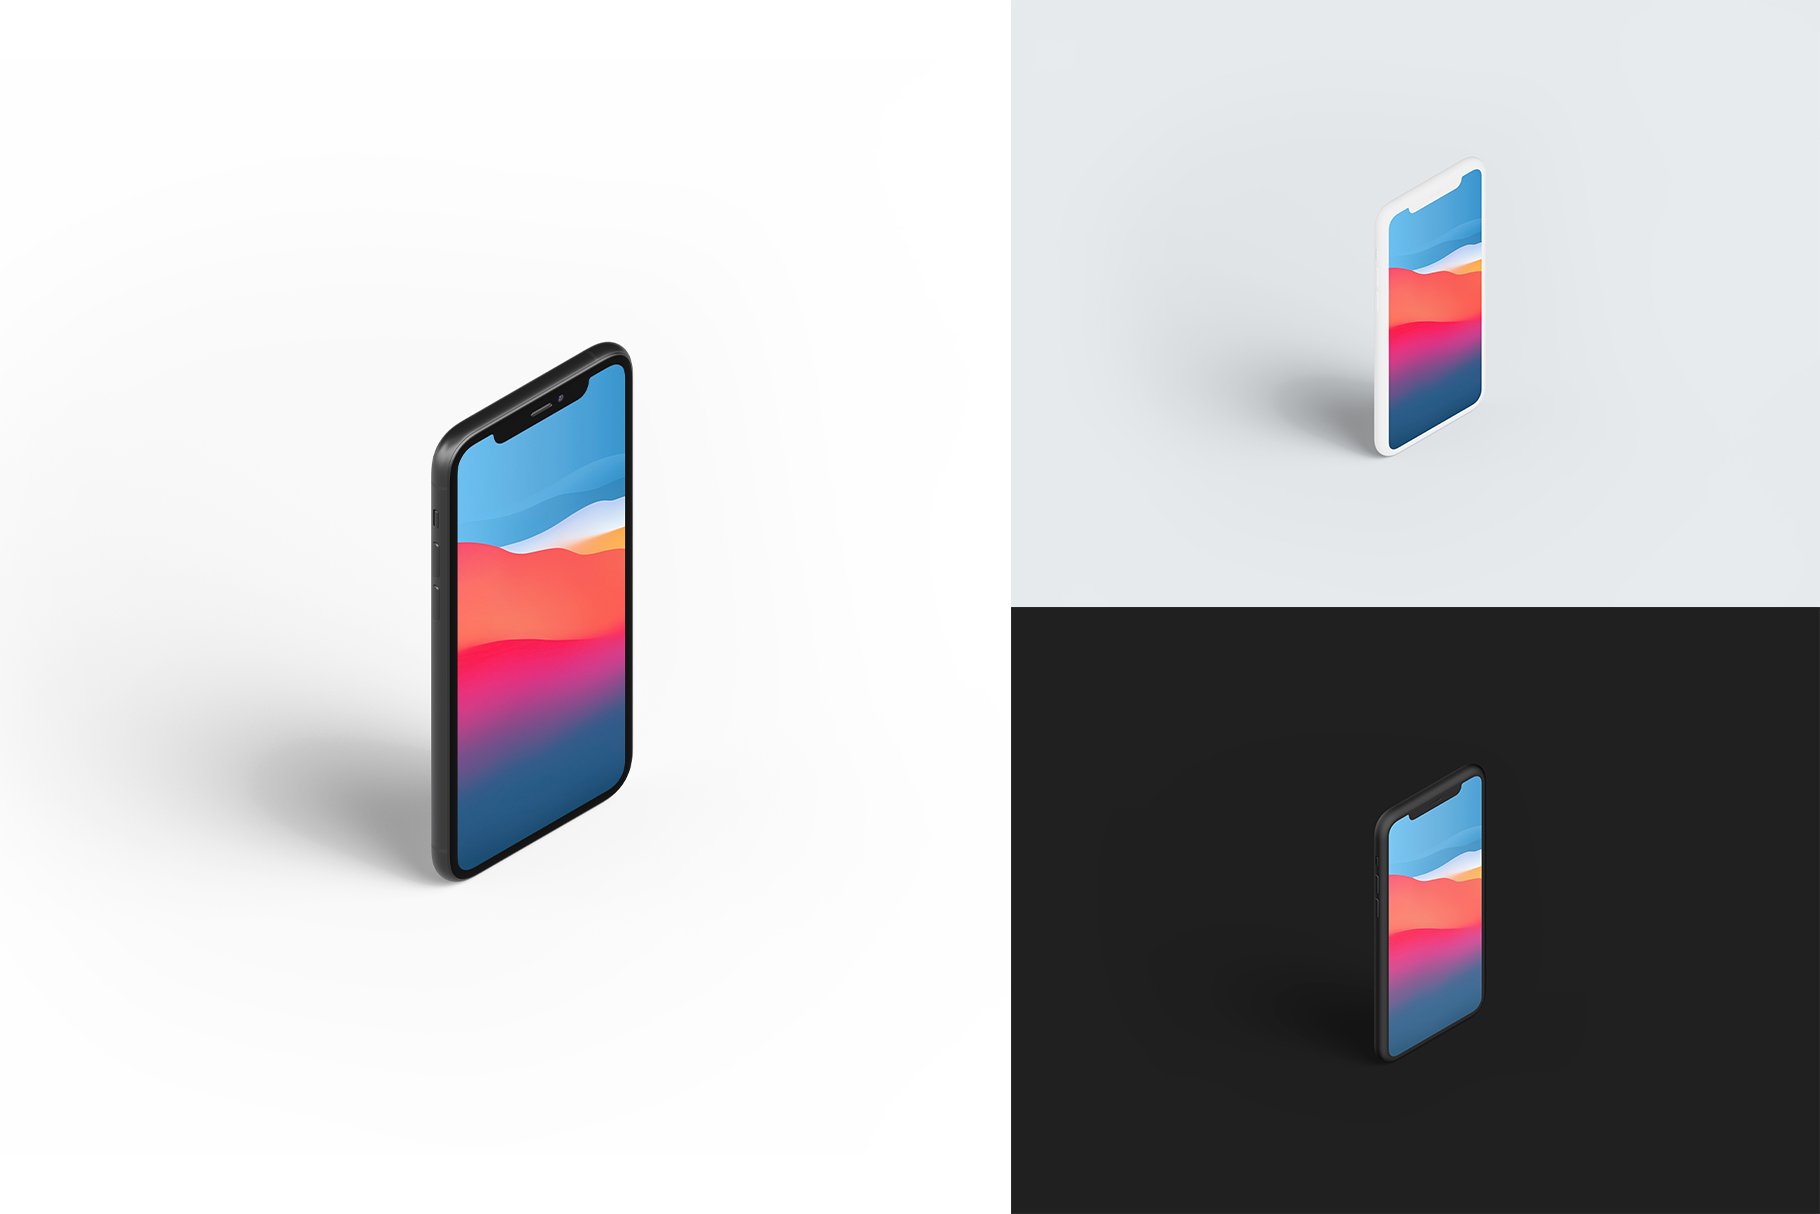 iphone 11 pro mockup pack by anthony boyd graphics 28s14v229 836